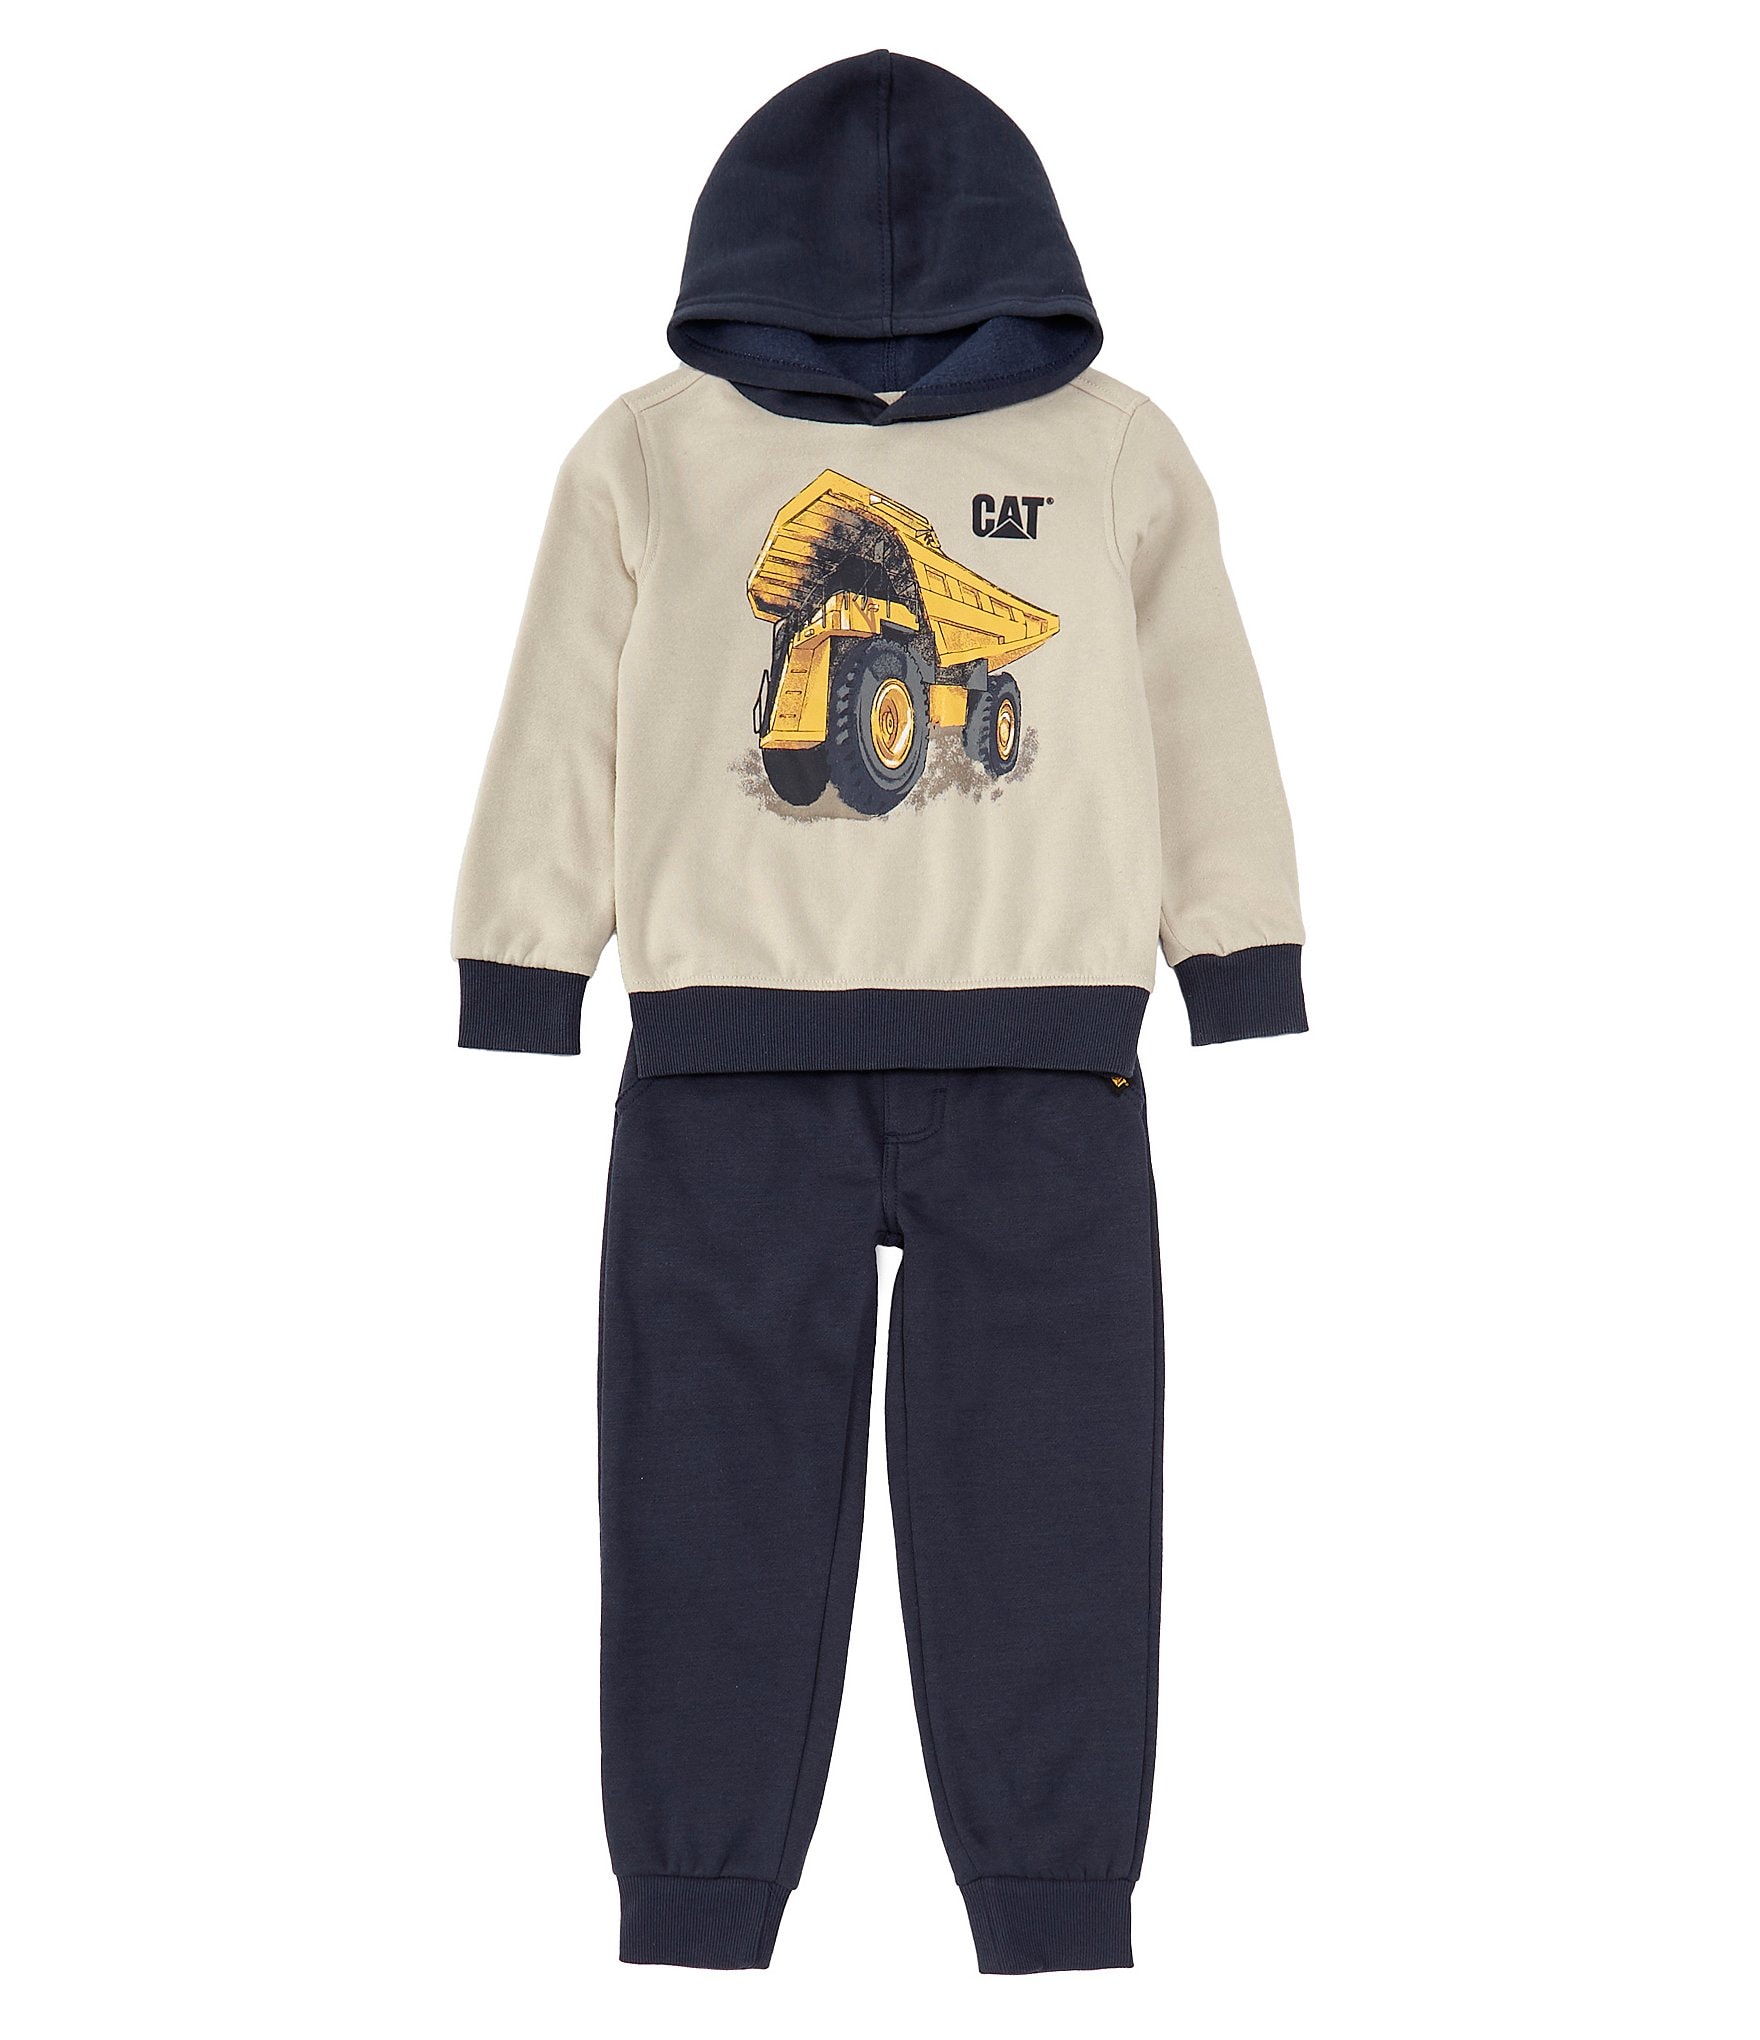 Guess Little Boys 2T-7 Long Sleeve Color Block French Terry Jacket &  Matching Jogger Pants Set